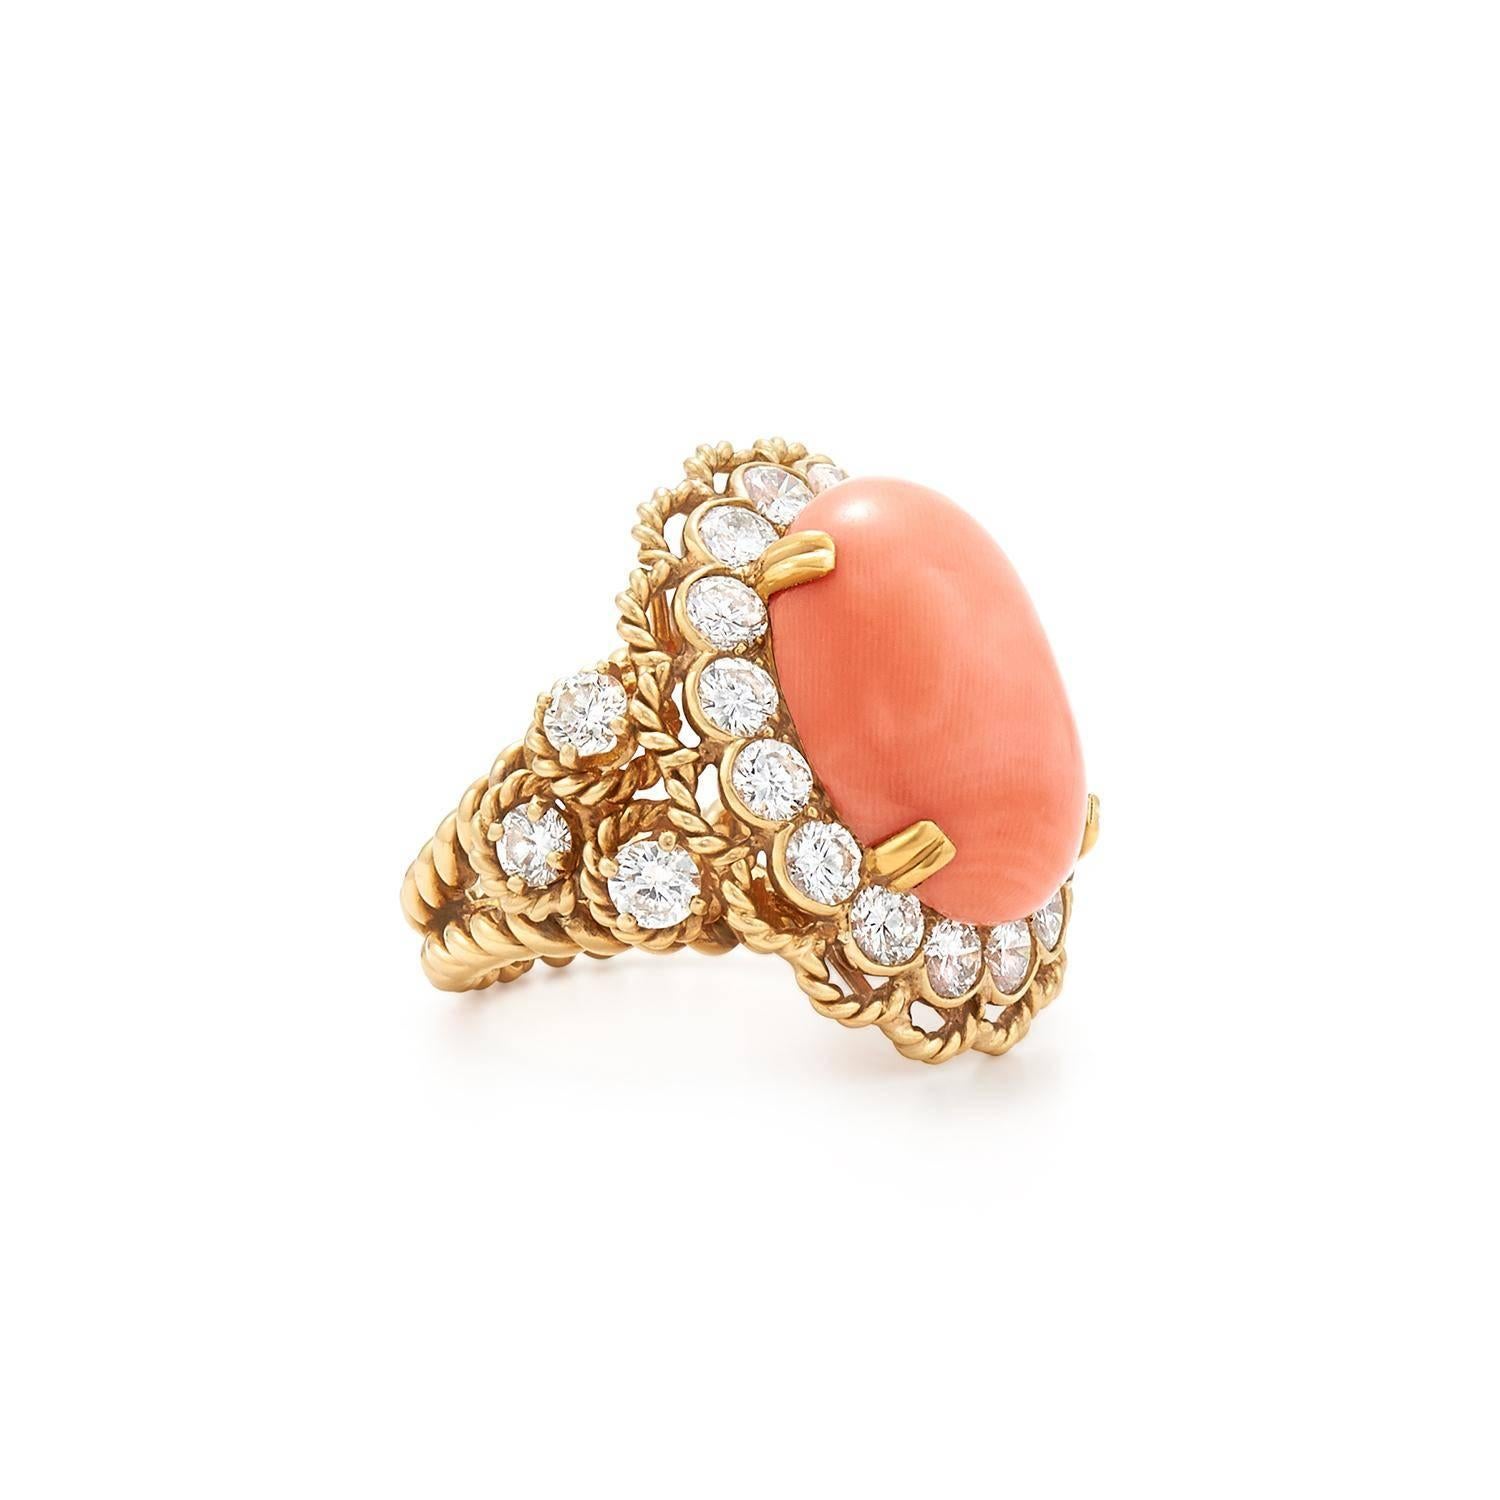 Set with a cabochon coral within a round brilliant diamond surround flanked to either side by three round brilliant diamonds to the 18k gold twisted rope shank and detail, mounted in 18k gold

Coral Cabochon measures approximately 19.0 by